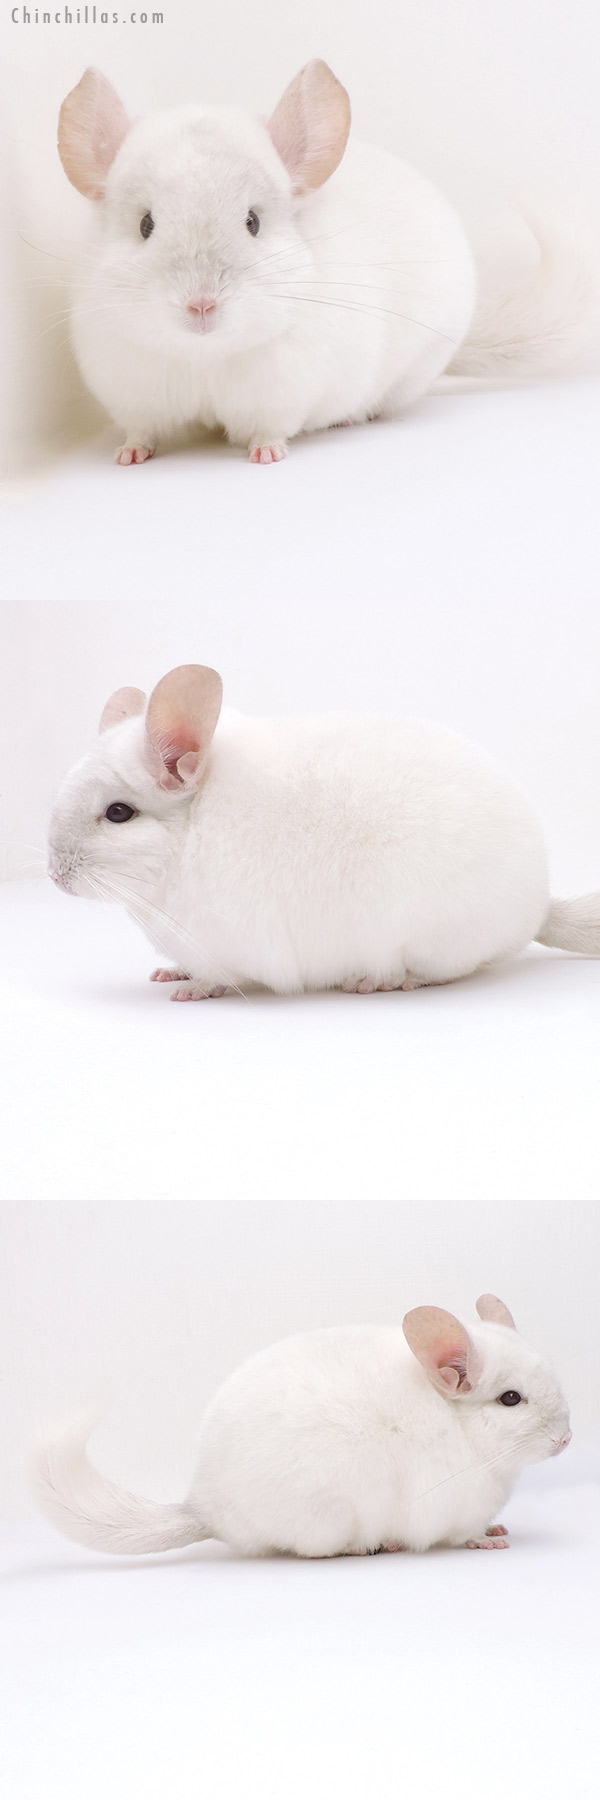 Chinchilla or related item offered for sale or export on Chinchillas.com - 19026 Premium Production Quality Pink White Female Chinchilla